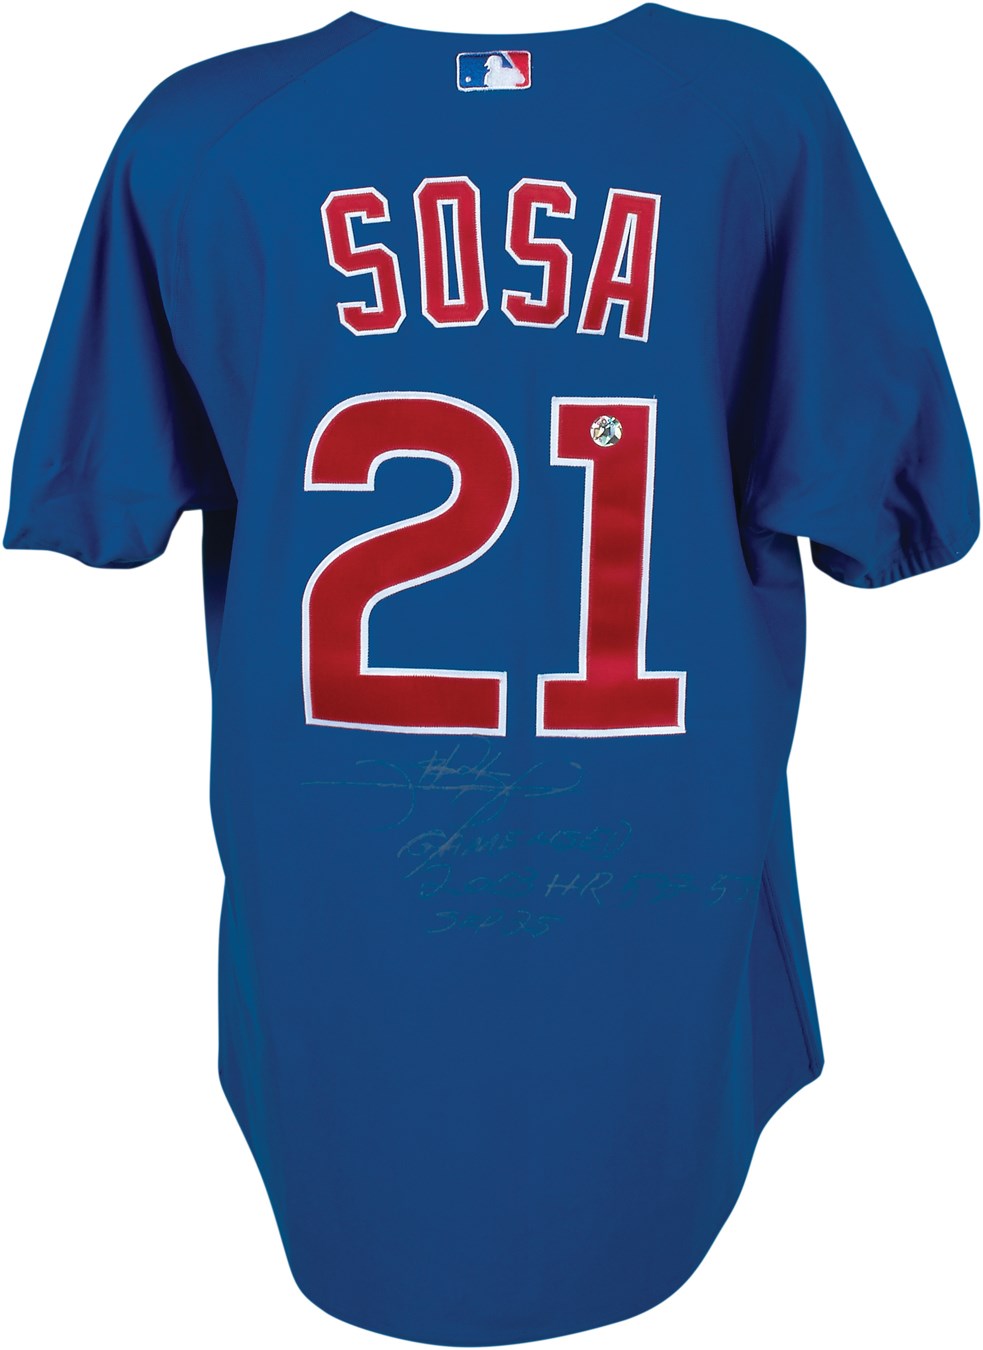 Chicago Cubs & Wrigley Field - 2003 Sammy Sosa Signed Game Worn Career HRs #537 & #538 Jersey